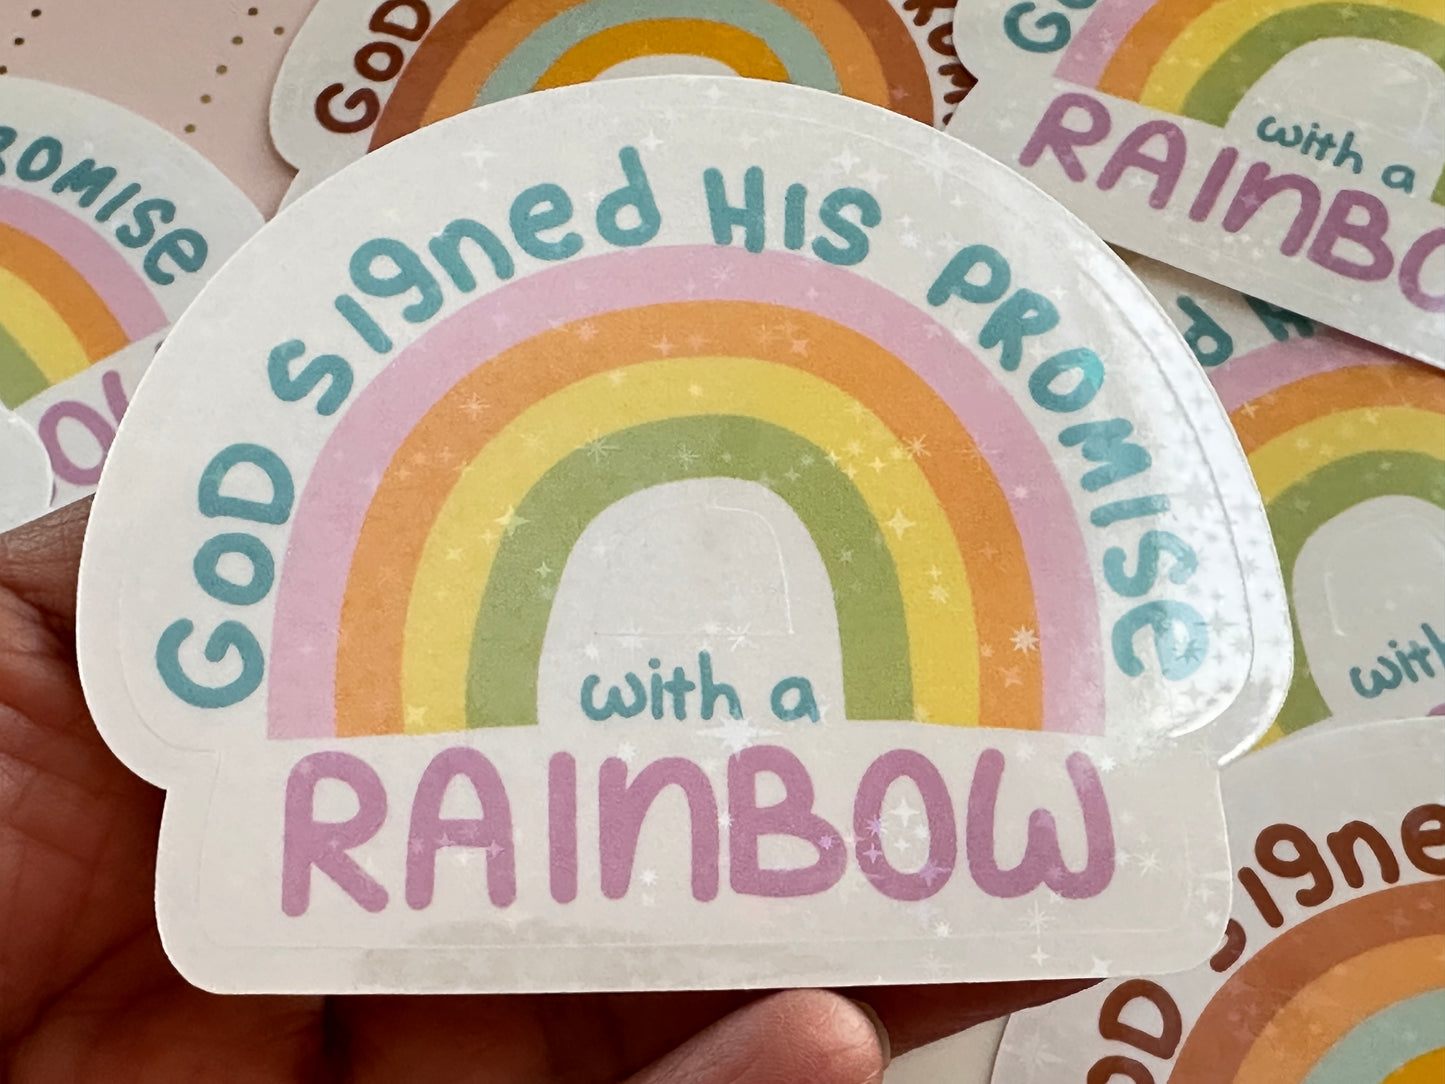 God Signed His Promise with a Rainbow Sparkly Die Cut Stickers